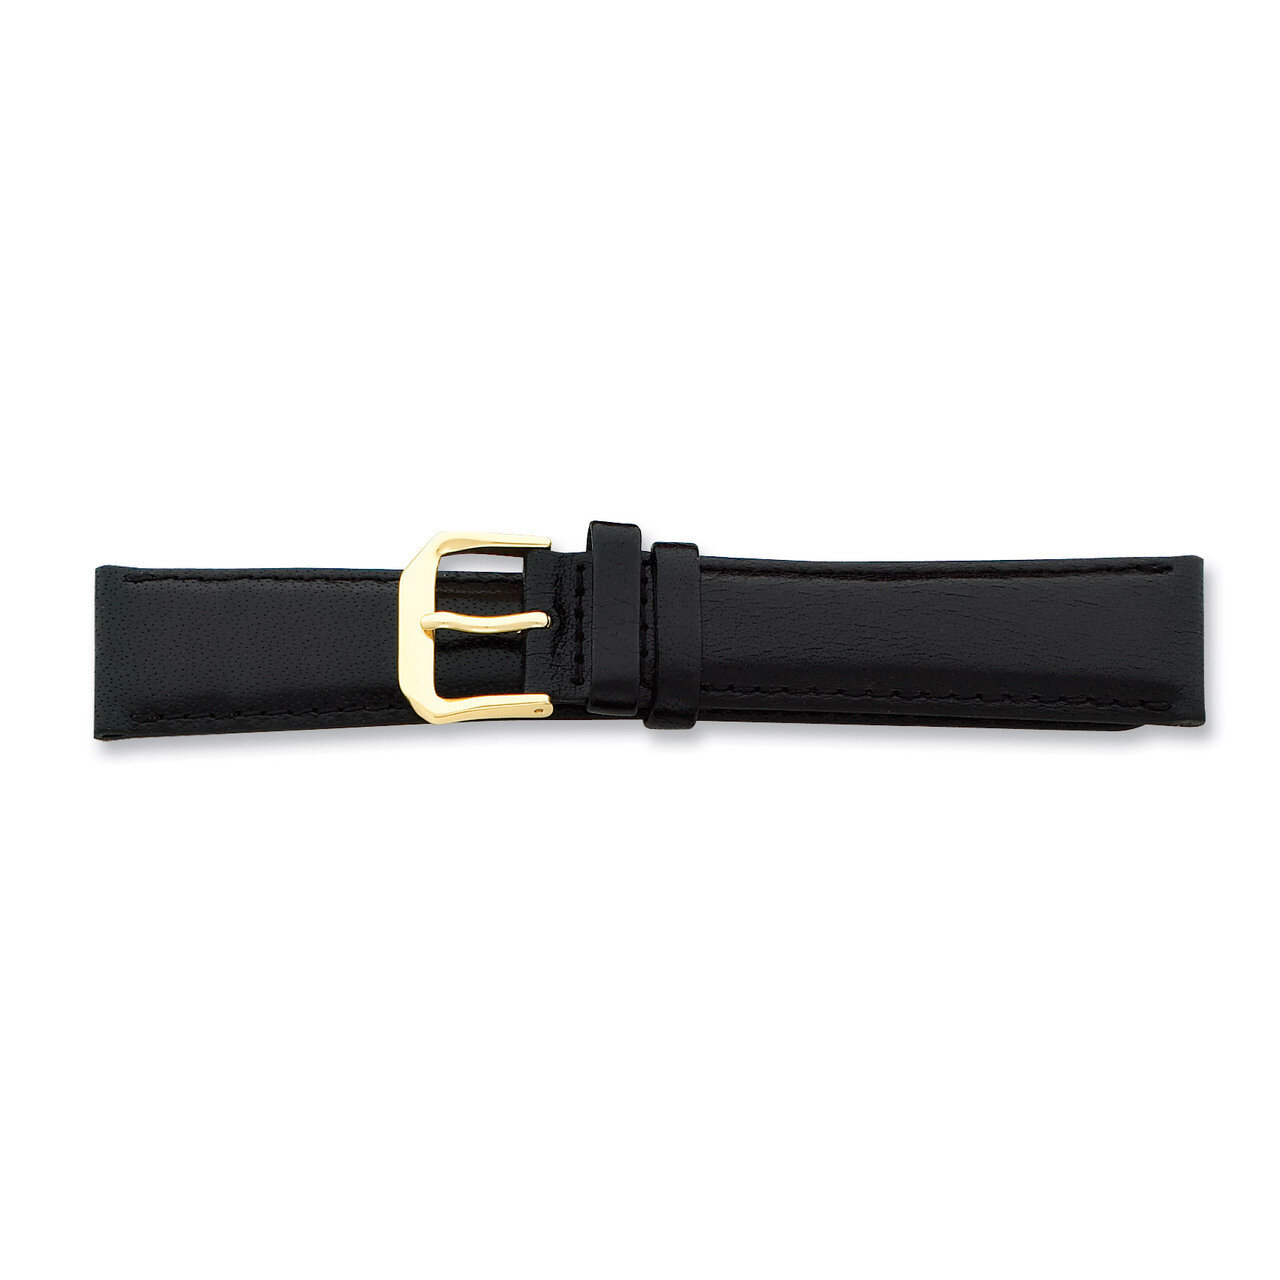 19mm Short Black Smooth Leather Buckle Watch Band 6.75 Inch Gold-tone BA8S-19